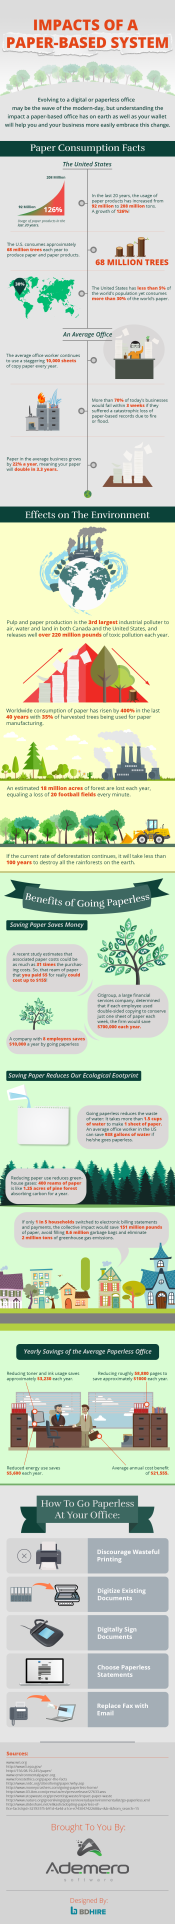 The Most Common Impacts of a Paper-based System